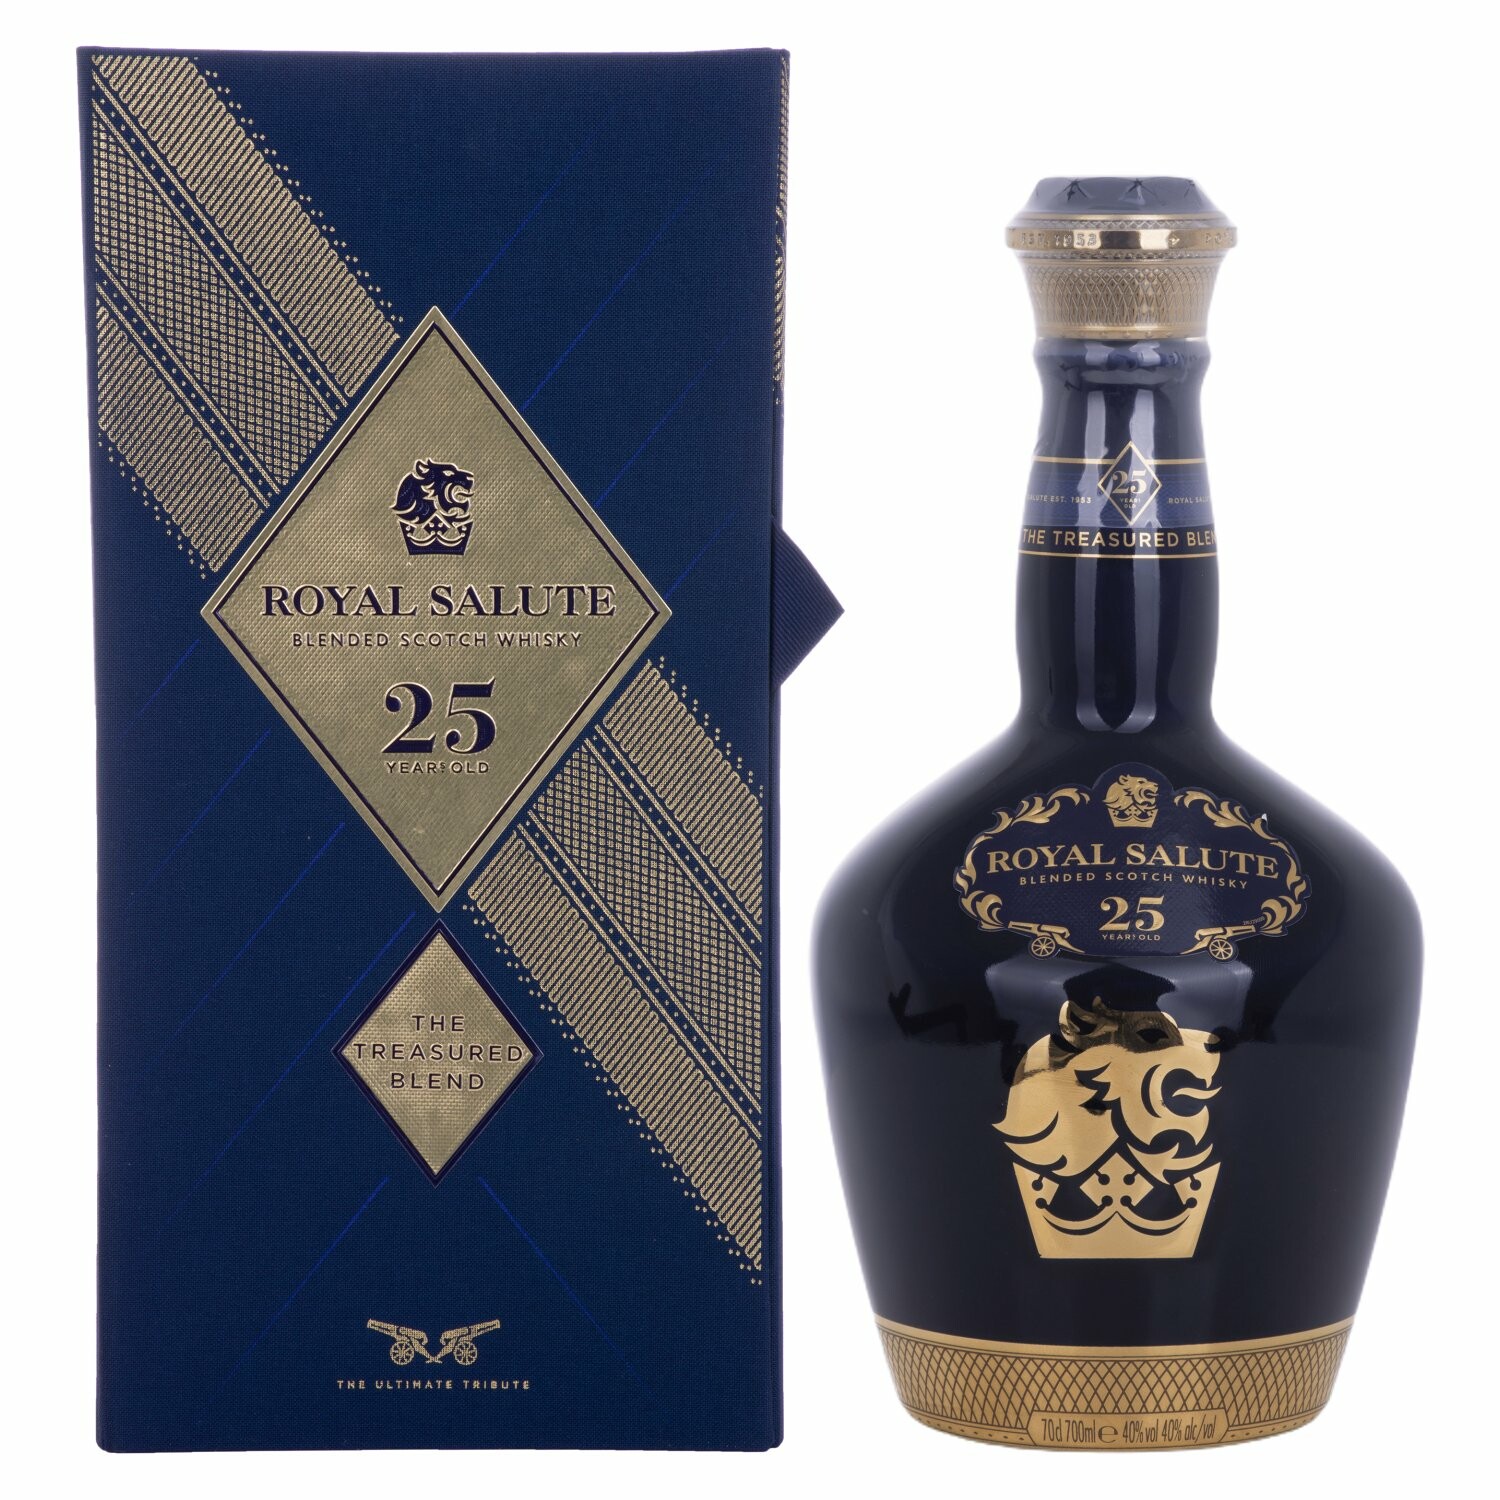 Royal Salute 25 Years Old THE TREASURE BLEND 40% Vol. 0,7l in Giftbox